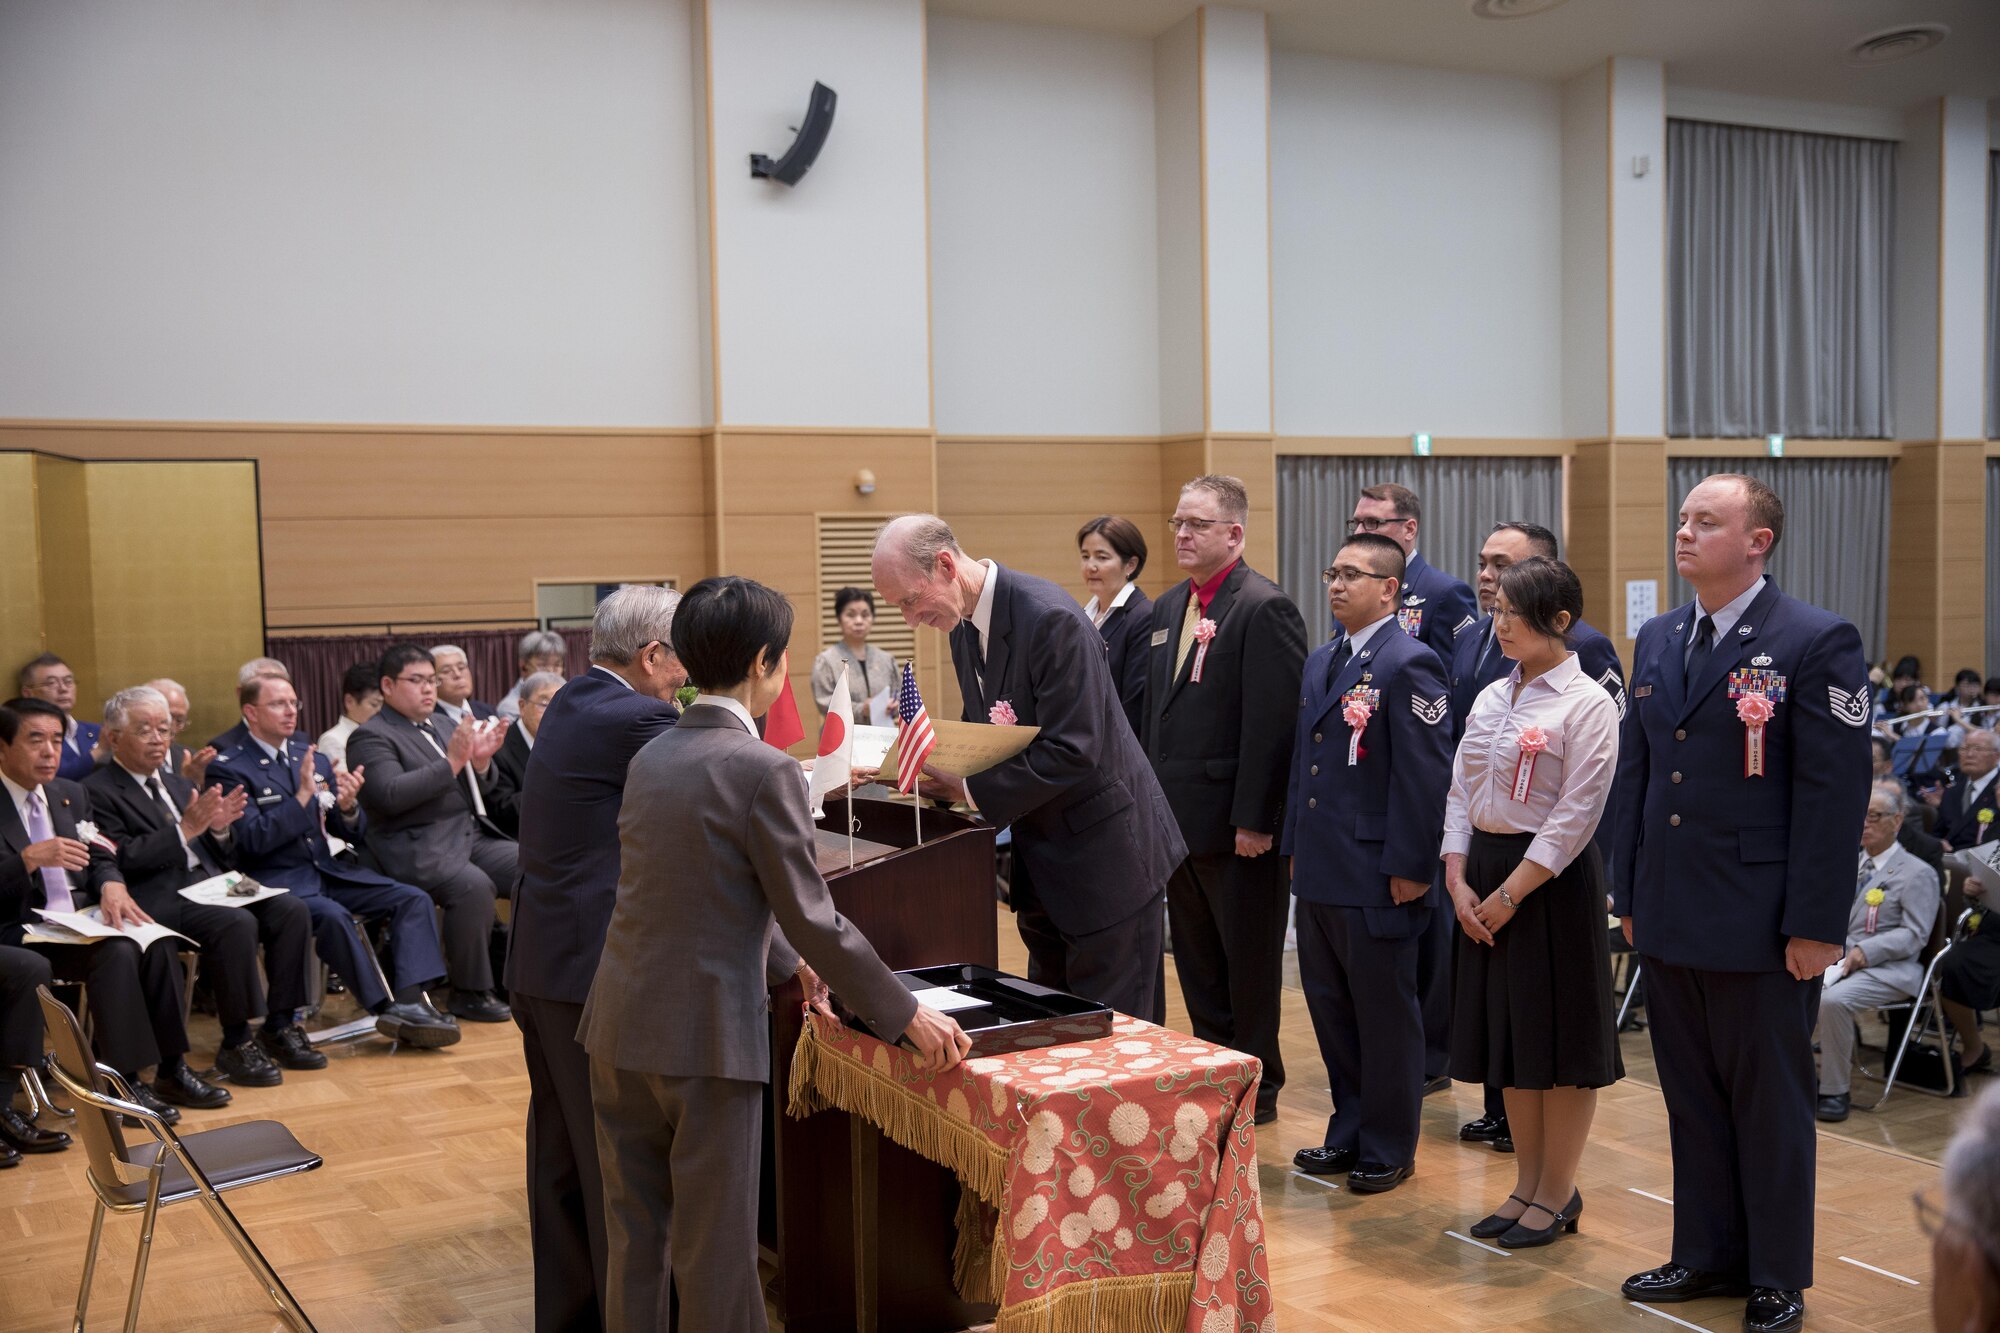 Paul Keenan, 374th Force Support Squadron director, accepts the Good Deed Award on behalf of Team Yokota during a ceremony, May 20, 2017, at the Meiji Shrine, Tokyo, Japan. The five groups from Yokota Air Base that received this year’s award included: the Yujo Community Center Outreach Program, D Flight Team, Kanto Plains Special Olympics, Yokota Air Base Knights of Columbus Council 15969 and a team from the 374th Logistics Readiness Squadron. (U.S. Air Force photo by Airman 1st Class Donald Hudson)